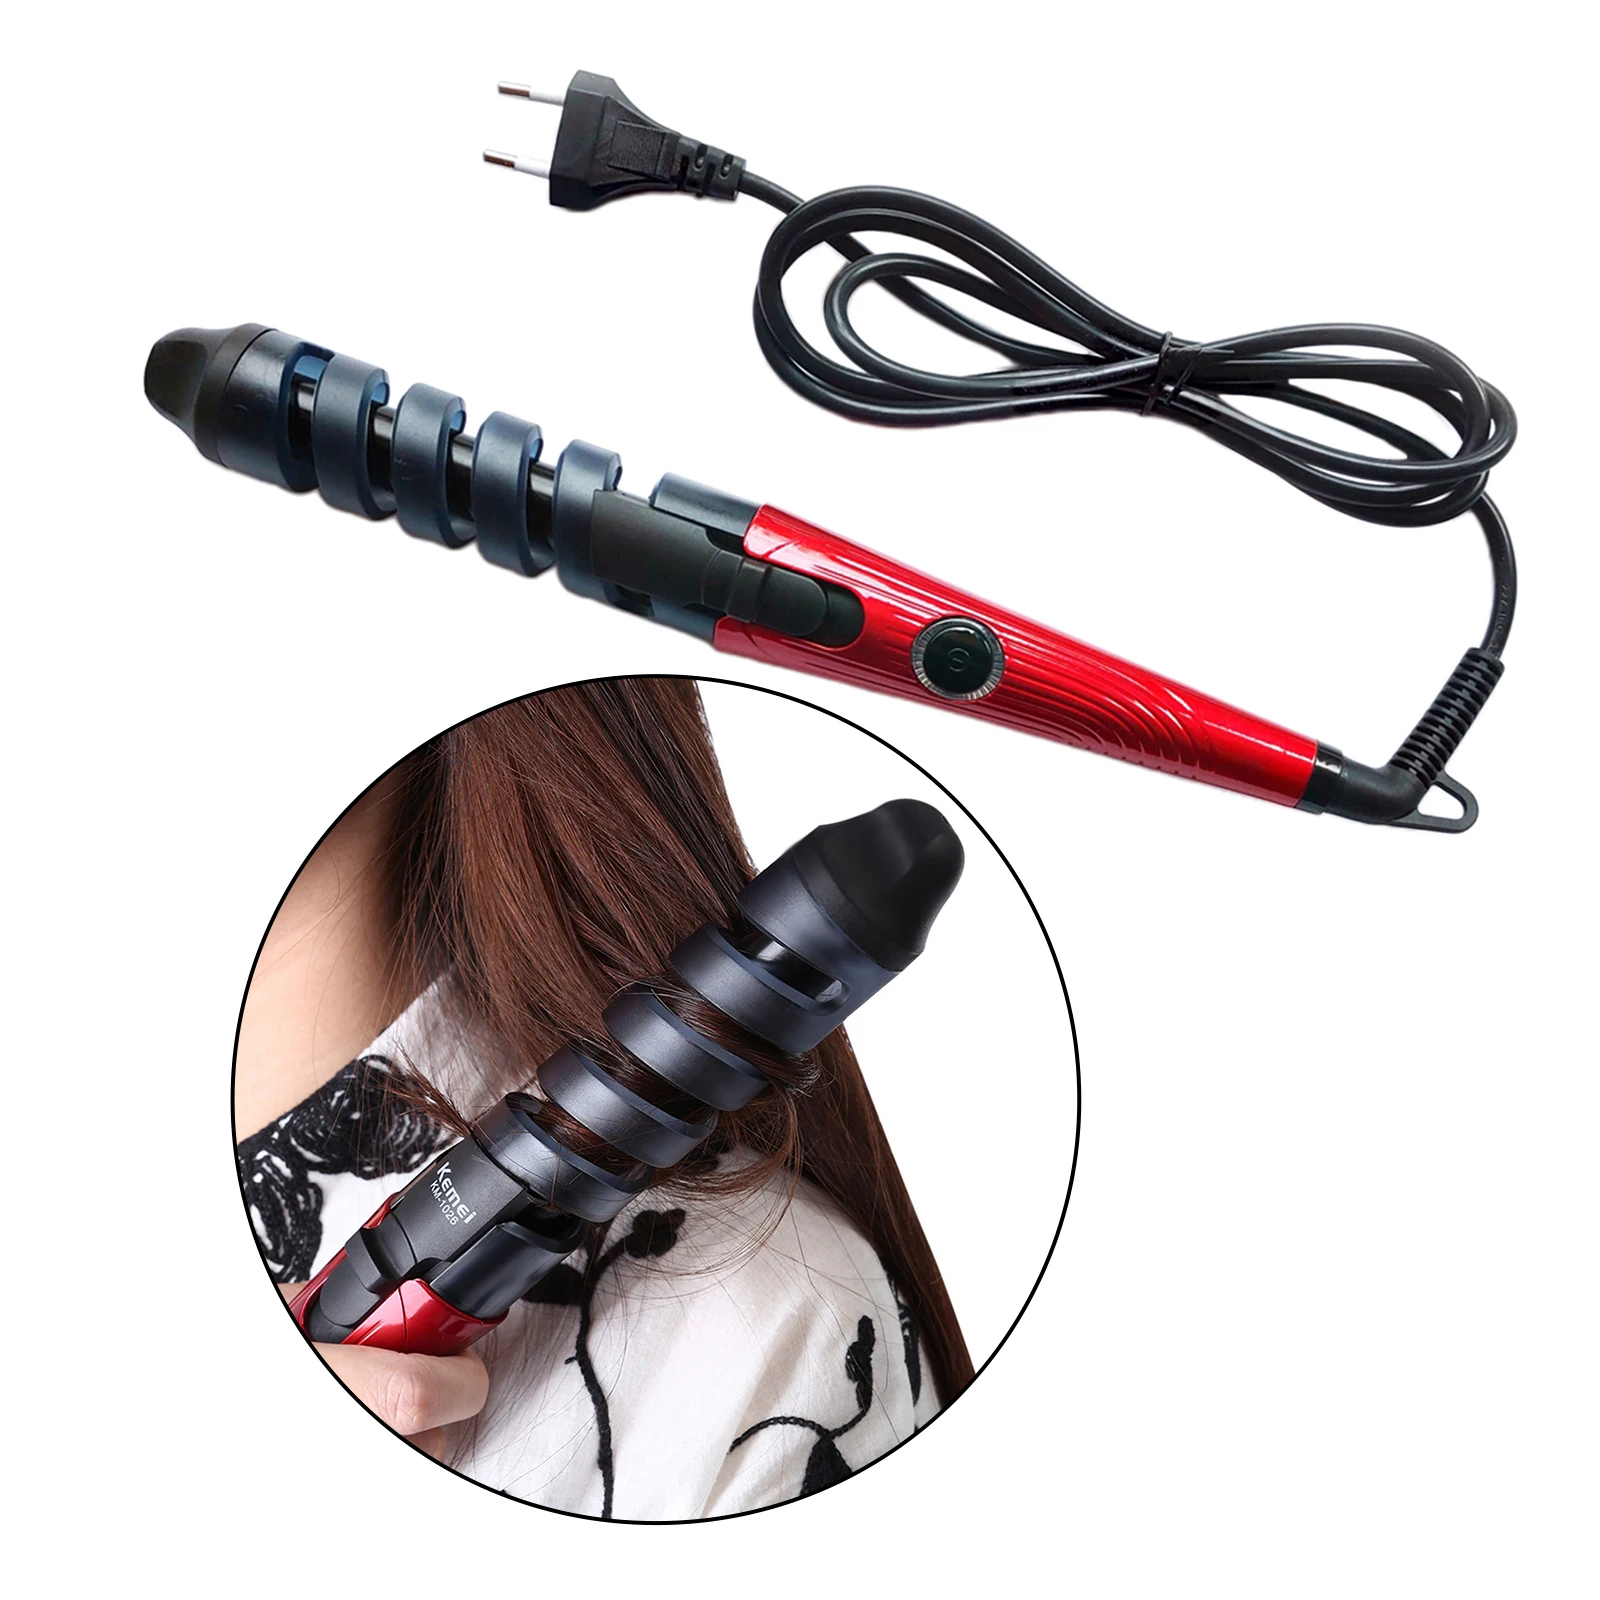 Pro Heating Hairdressing Hair Curlers Curling Wand Rod for All Hair Types Iron Curling Tongs Crimping Styling